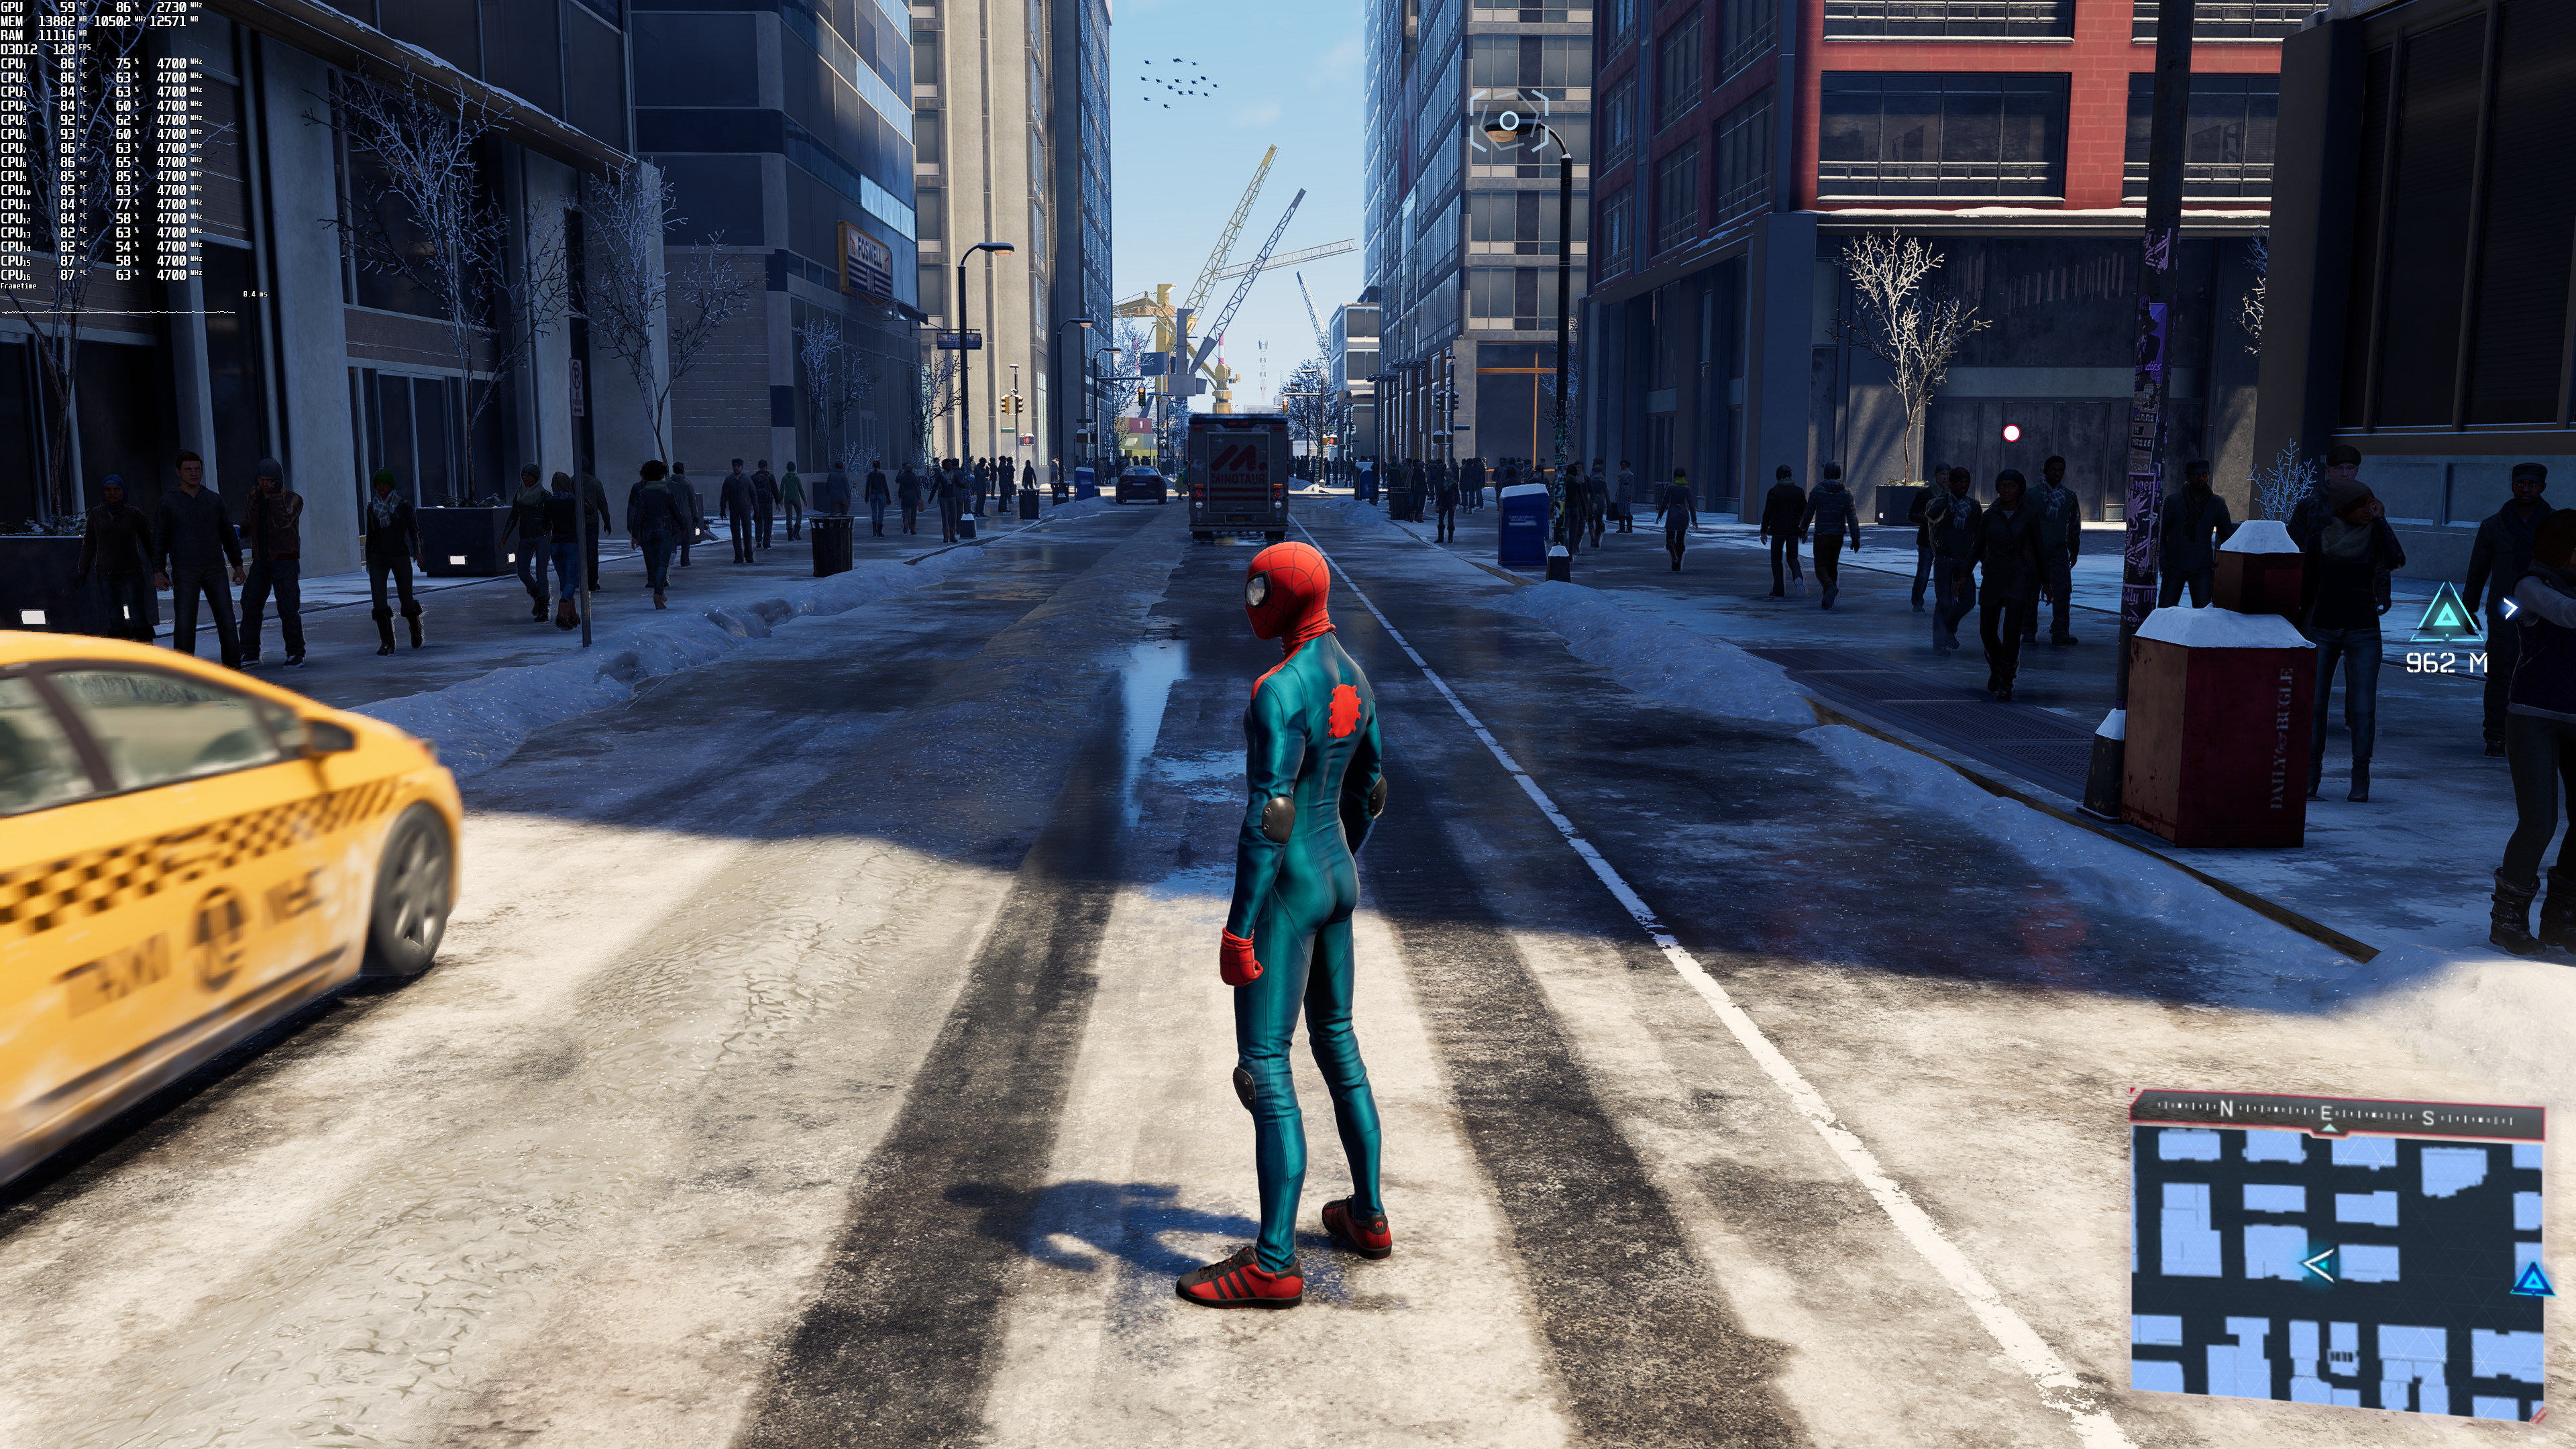 Marvel's Spider-Man Miles Morales (PC) Review - Web-Swinging Through All  These Ray Tracing - GamerBraves